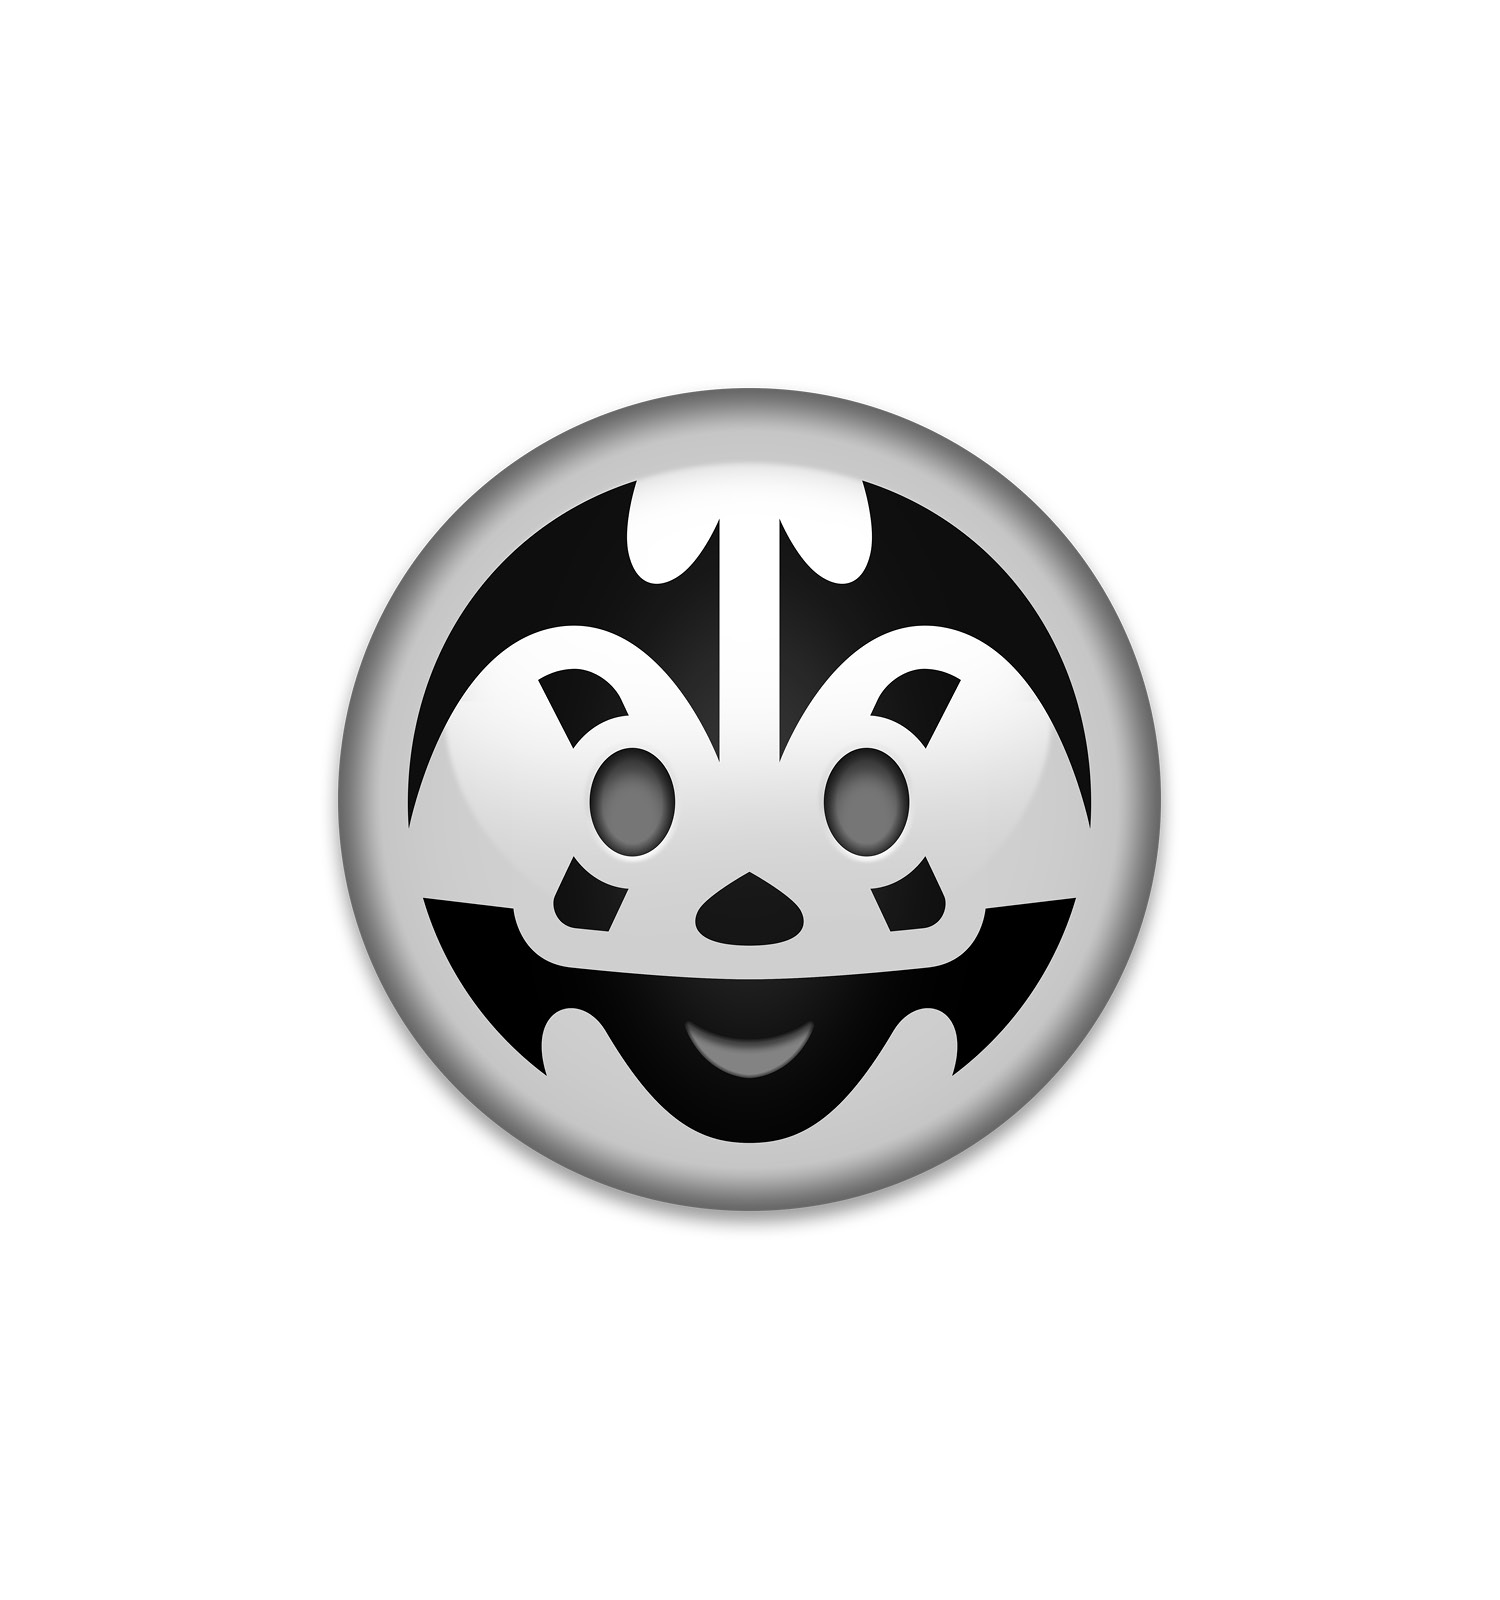 What is a juggalo symbol?